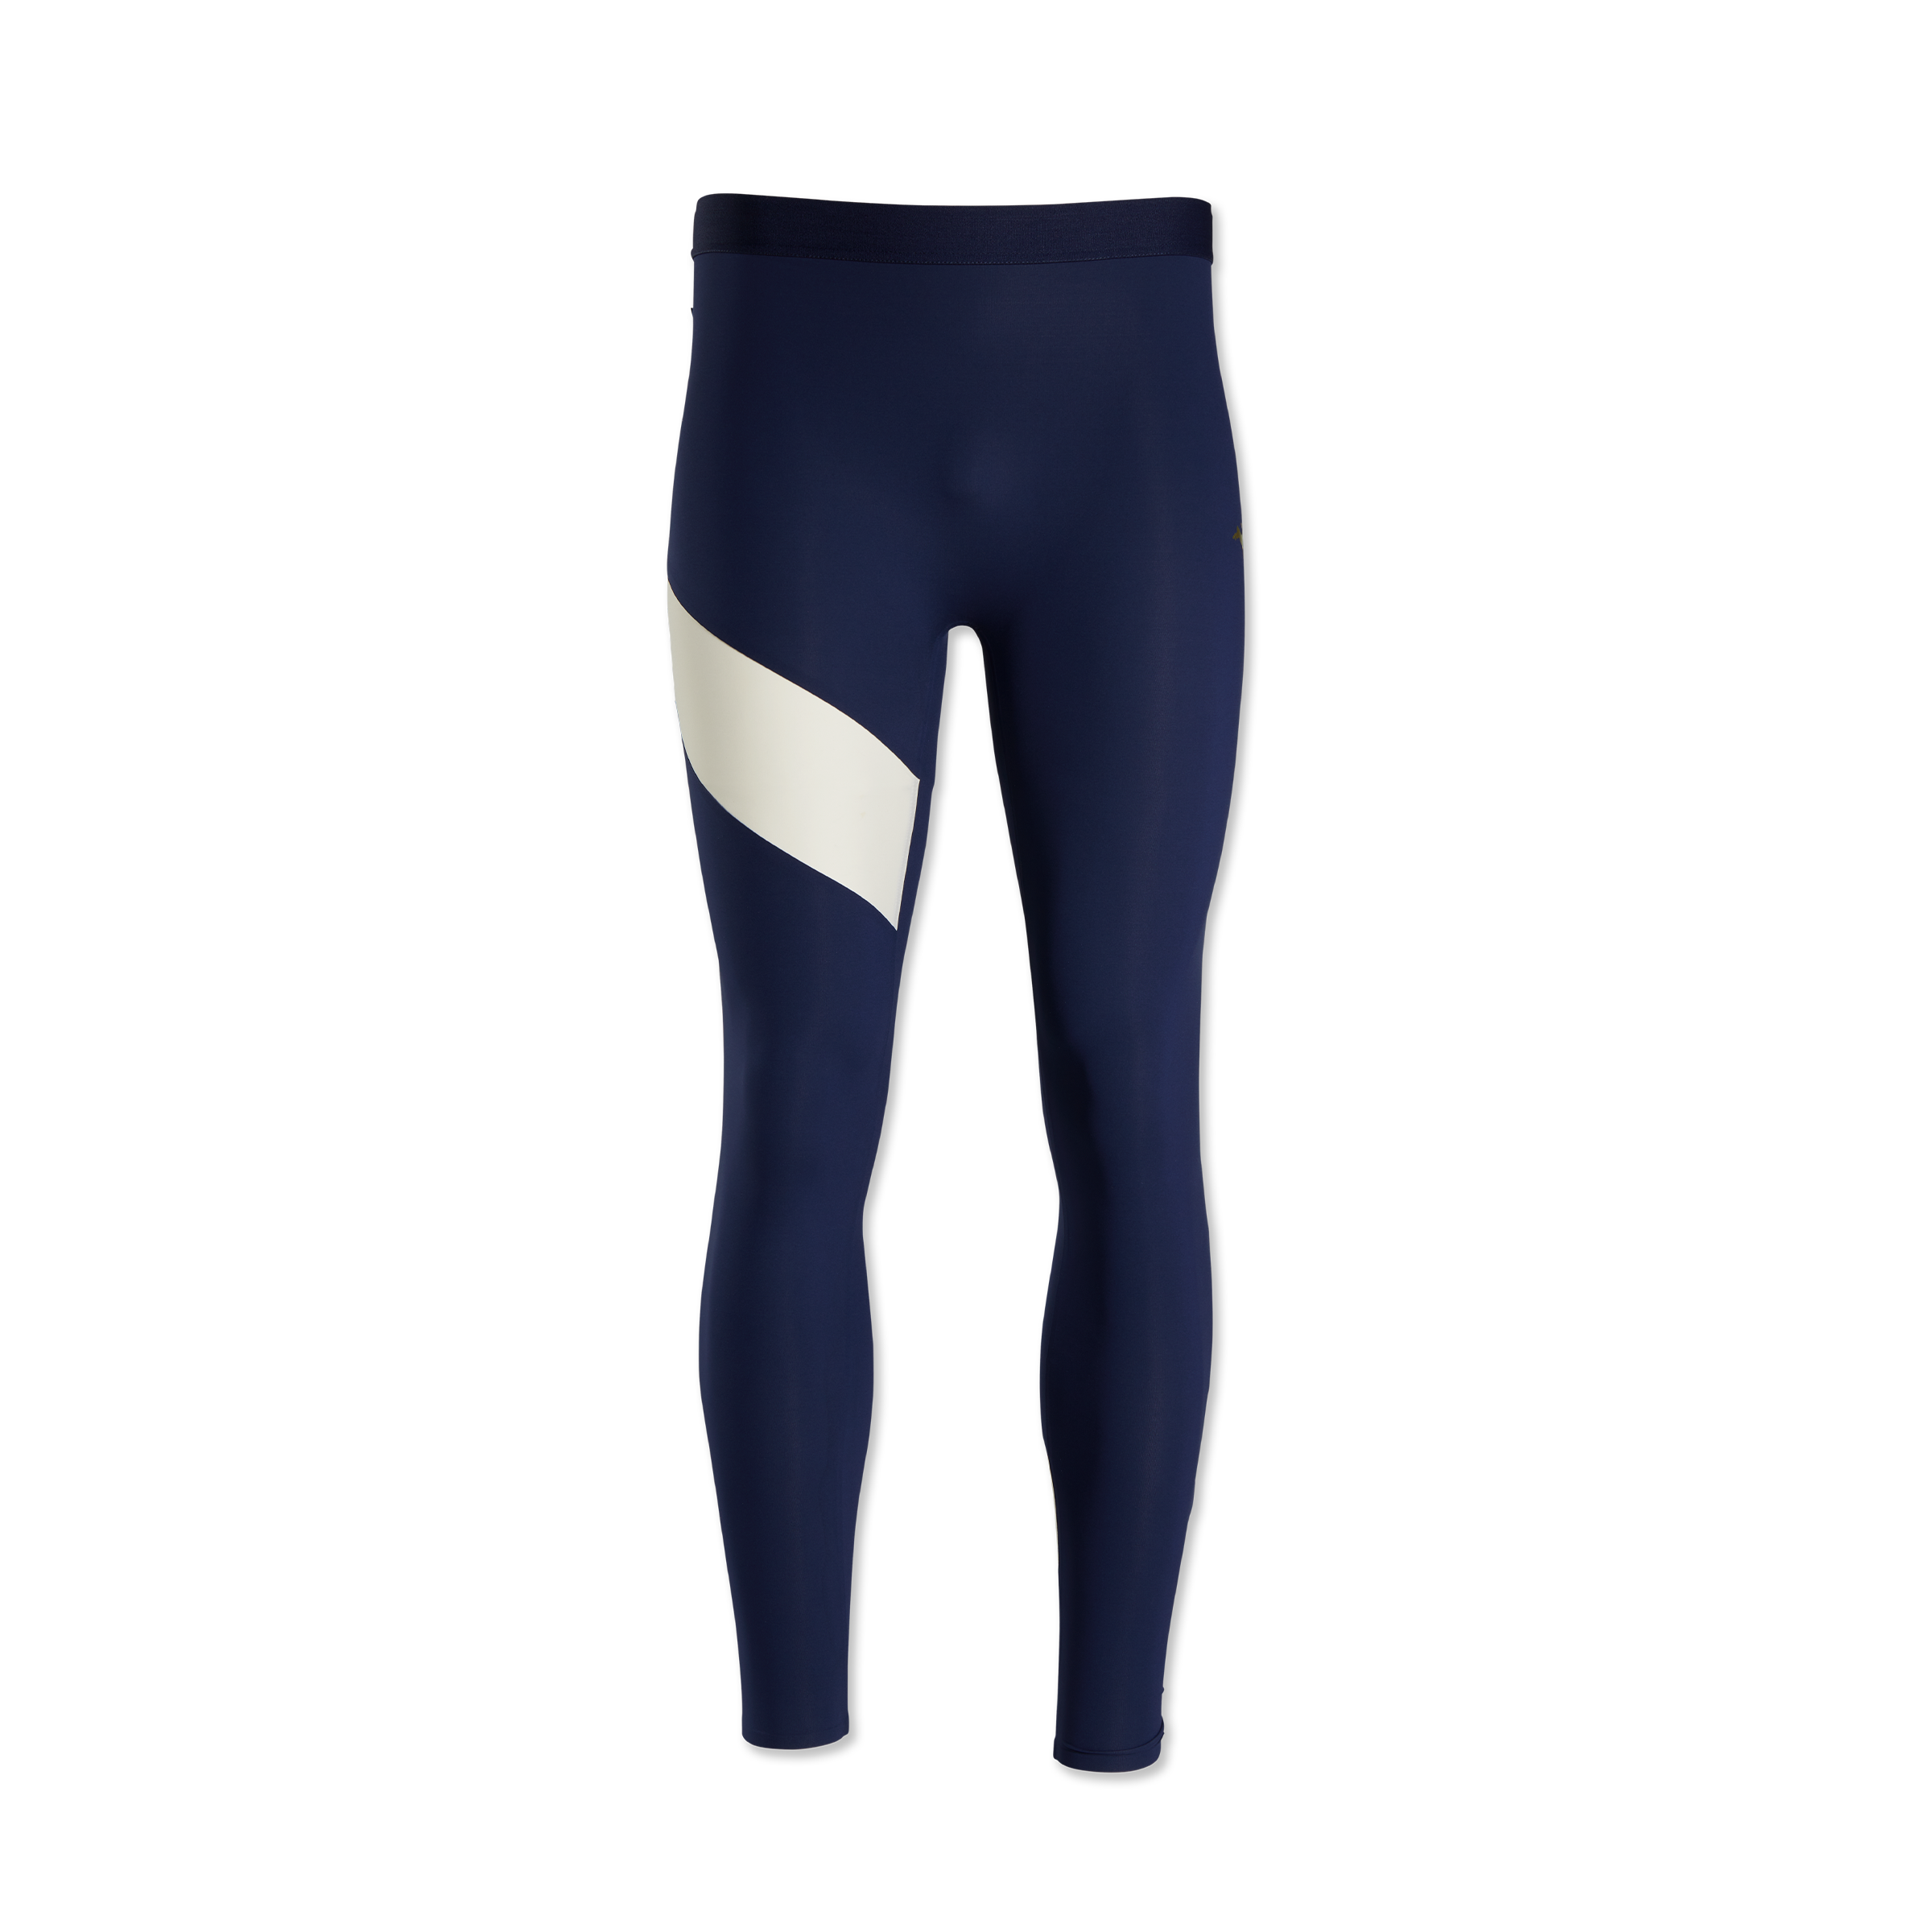 Built-in support solid tights